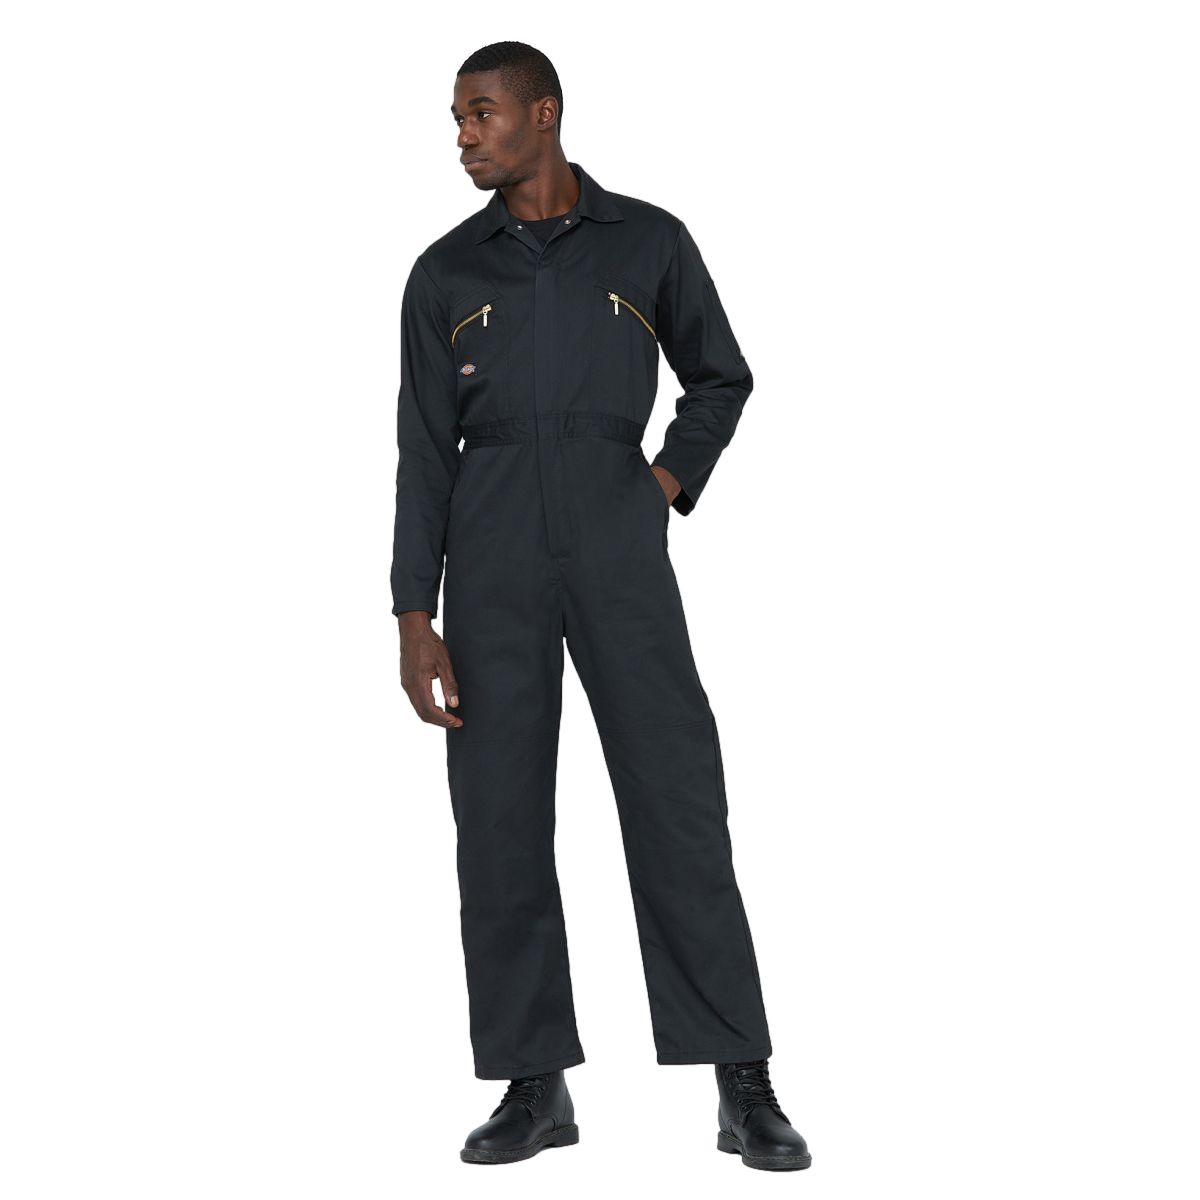 Combinaison Redhawk Coverhall Noir - Dickies - Taille S 3